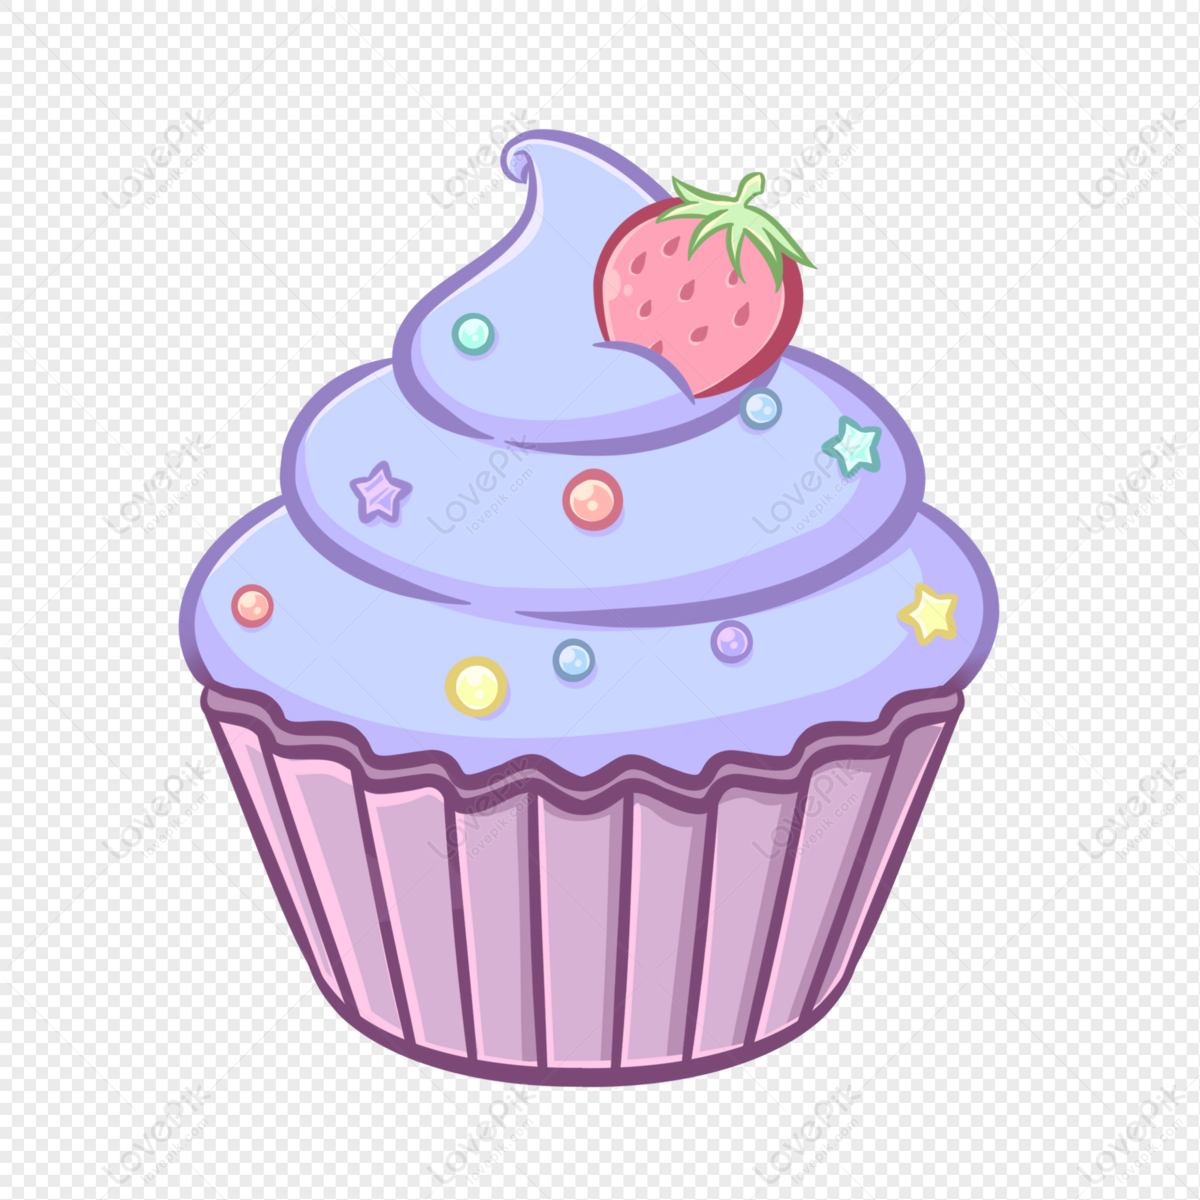 Cupcakes PNG Images With Transparent Background | Free Download On Lovepik